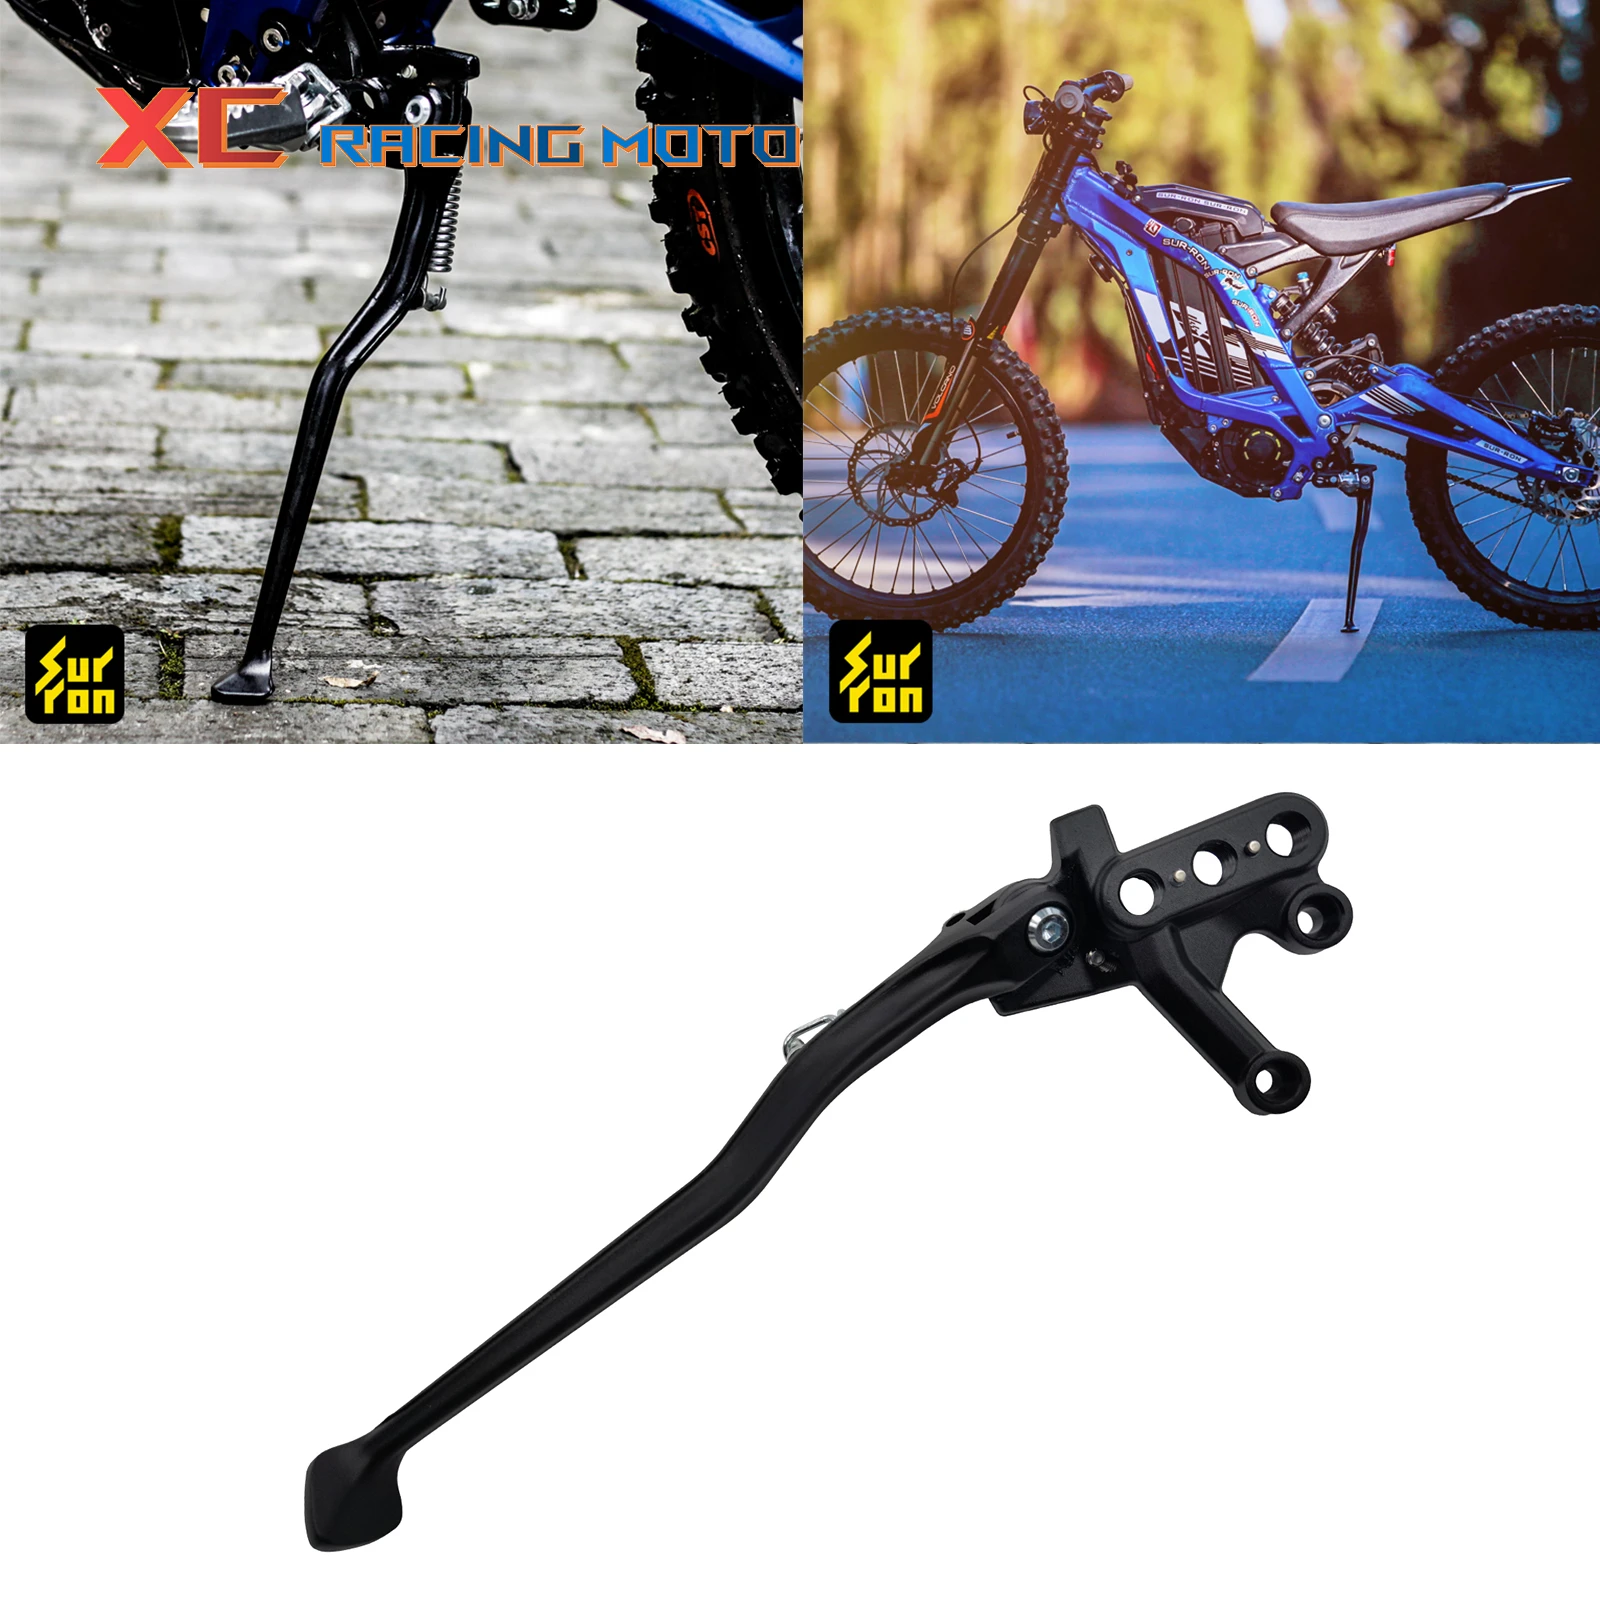 Suitable for SURRON Accessories SUR-RON Light Bee & Light Bee X Electric Cross-country Bike Side Bracket Assembly Foot Support